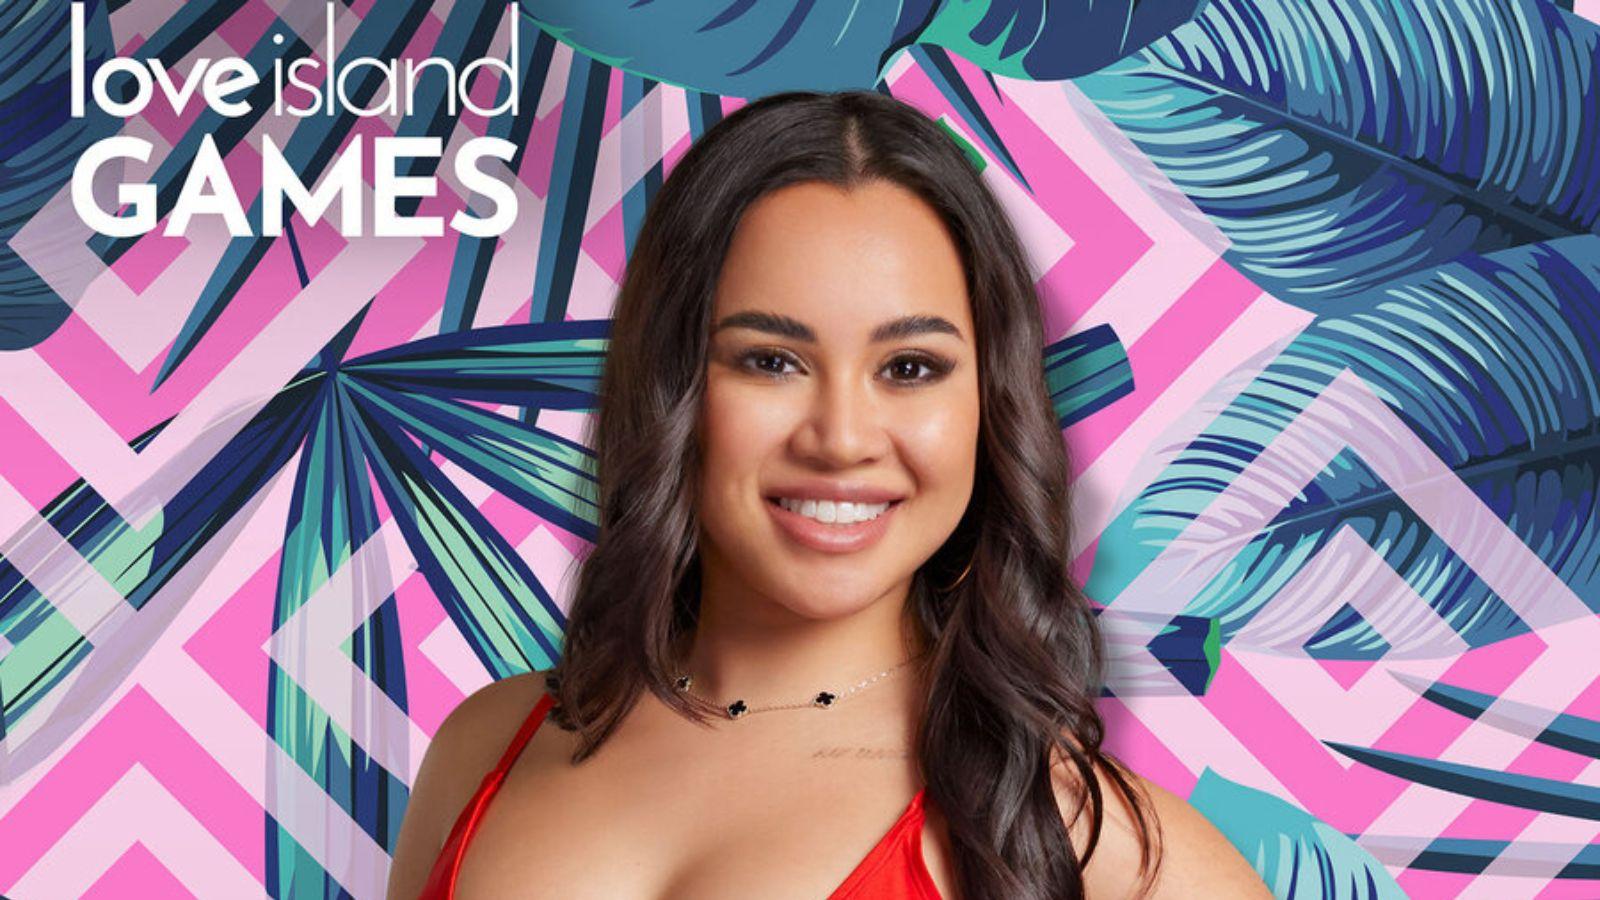 Jess from Love Island Games